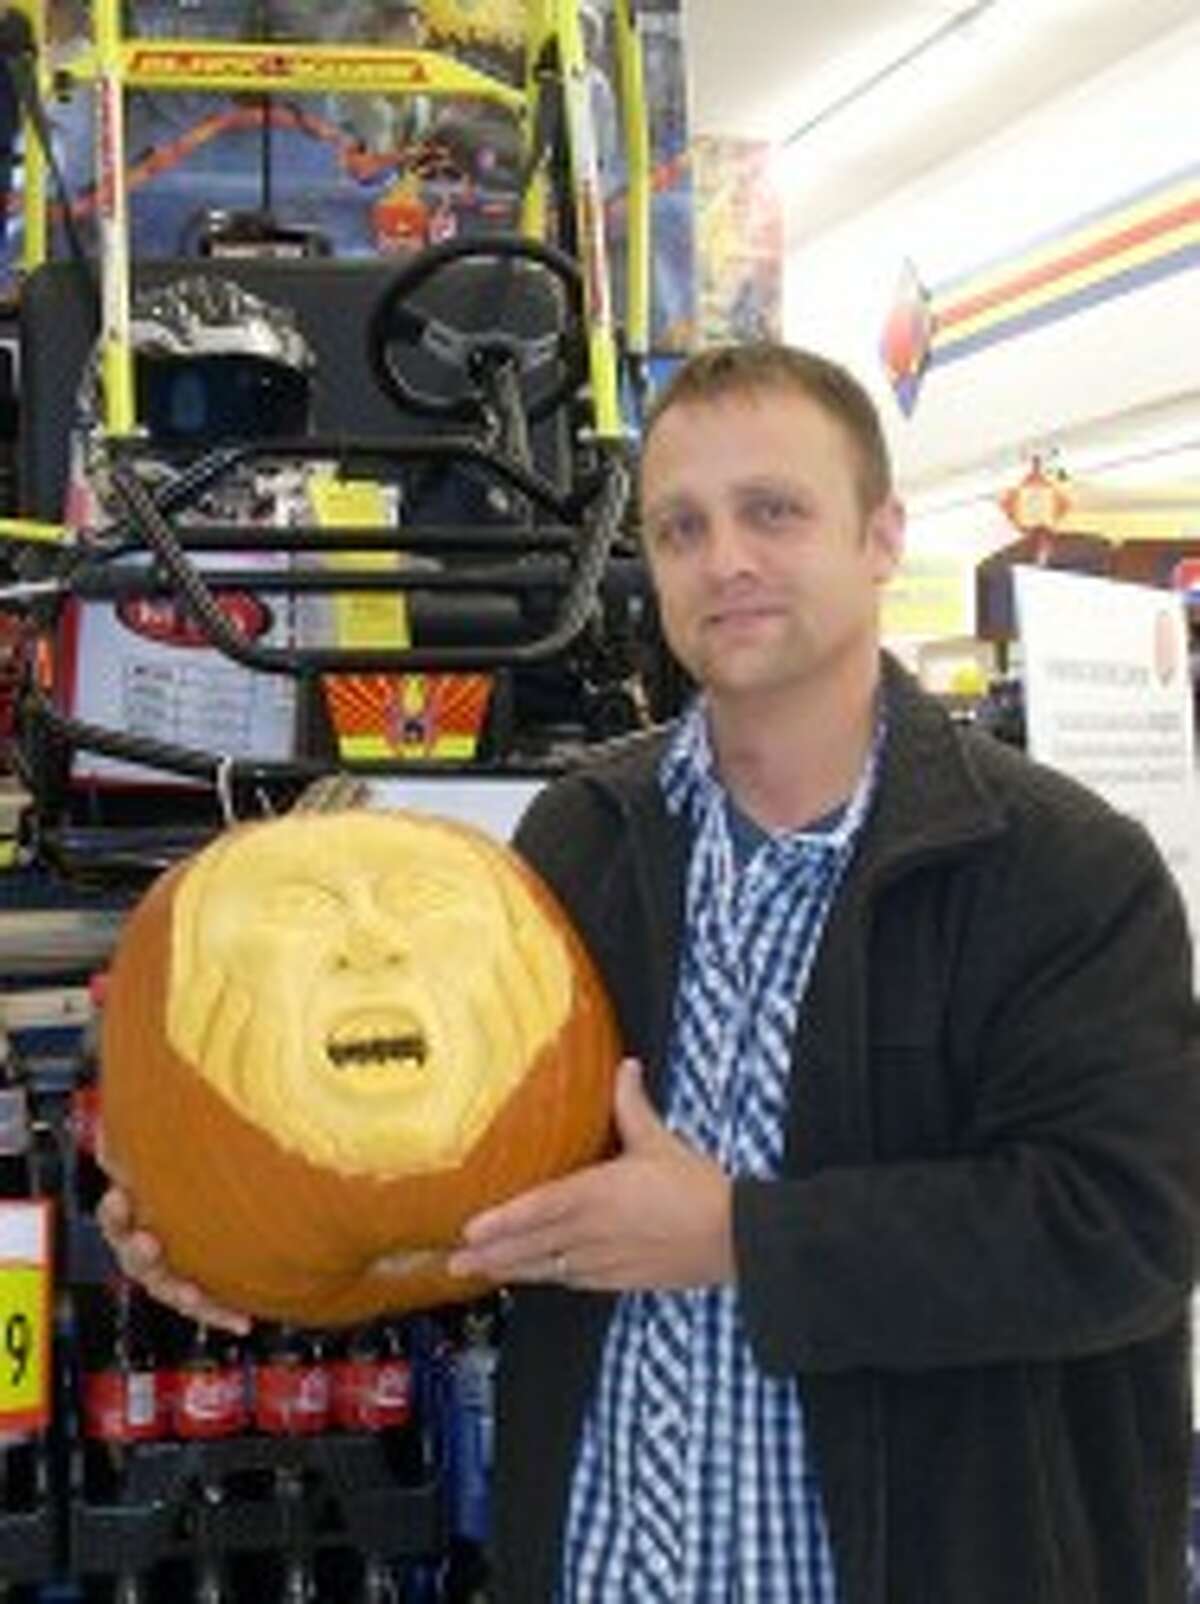 BEST PUMPKIN: Ryan Butler with his "Hands on Face Screaming Pumpkin" won first place in Leppink’s Grocery’s pumpkin decorating contest. He won the go-cart pictured at rear. (Courtesy photo)